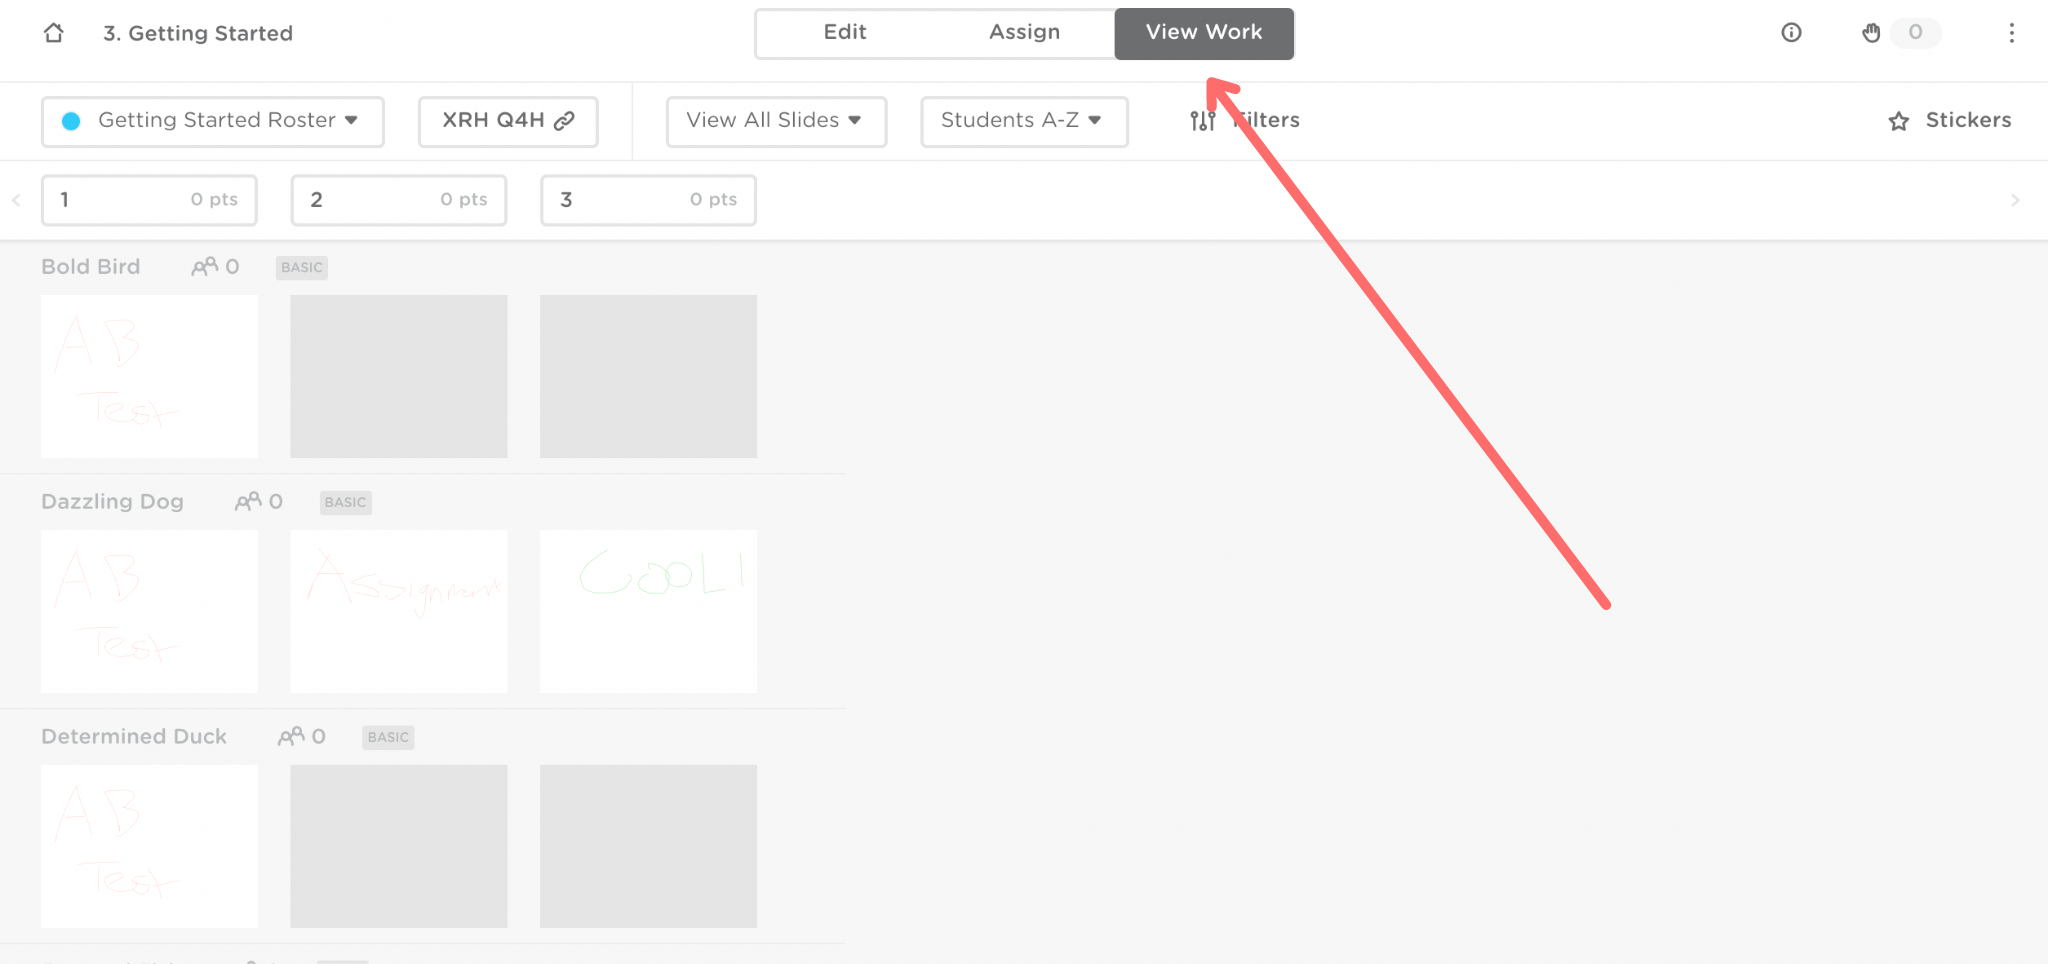 The View Work dashboard. A red arrow points to View Work at the top of the page. View work is highlighted in gray.